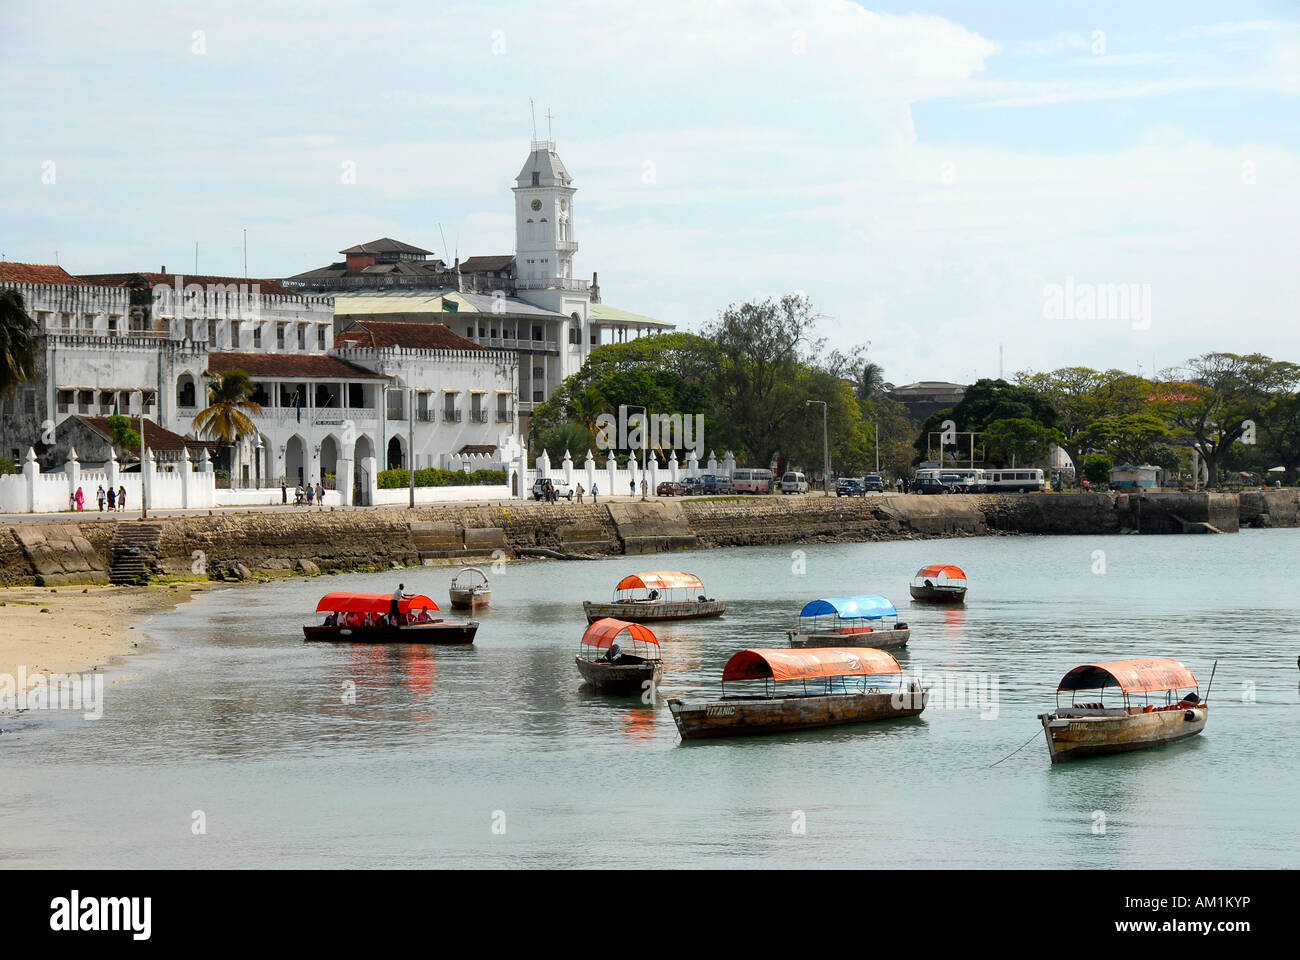 View of the city with Beit el-Sahel Palace Museum and boats Stone Town Zanzibar Tanzania Stock Photo